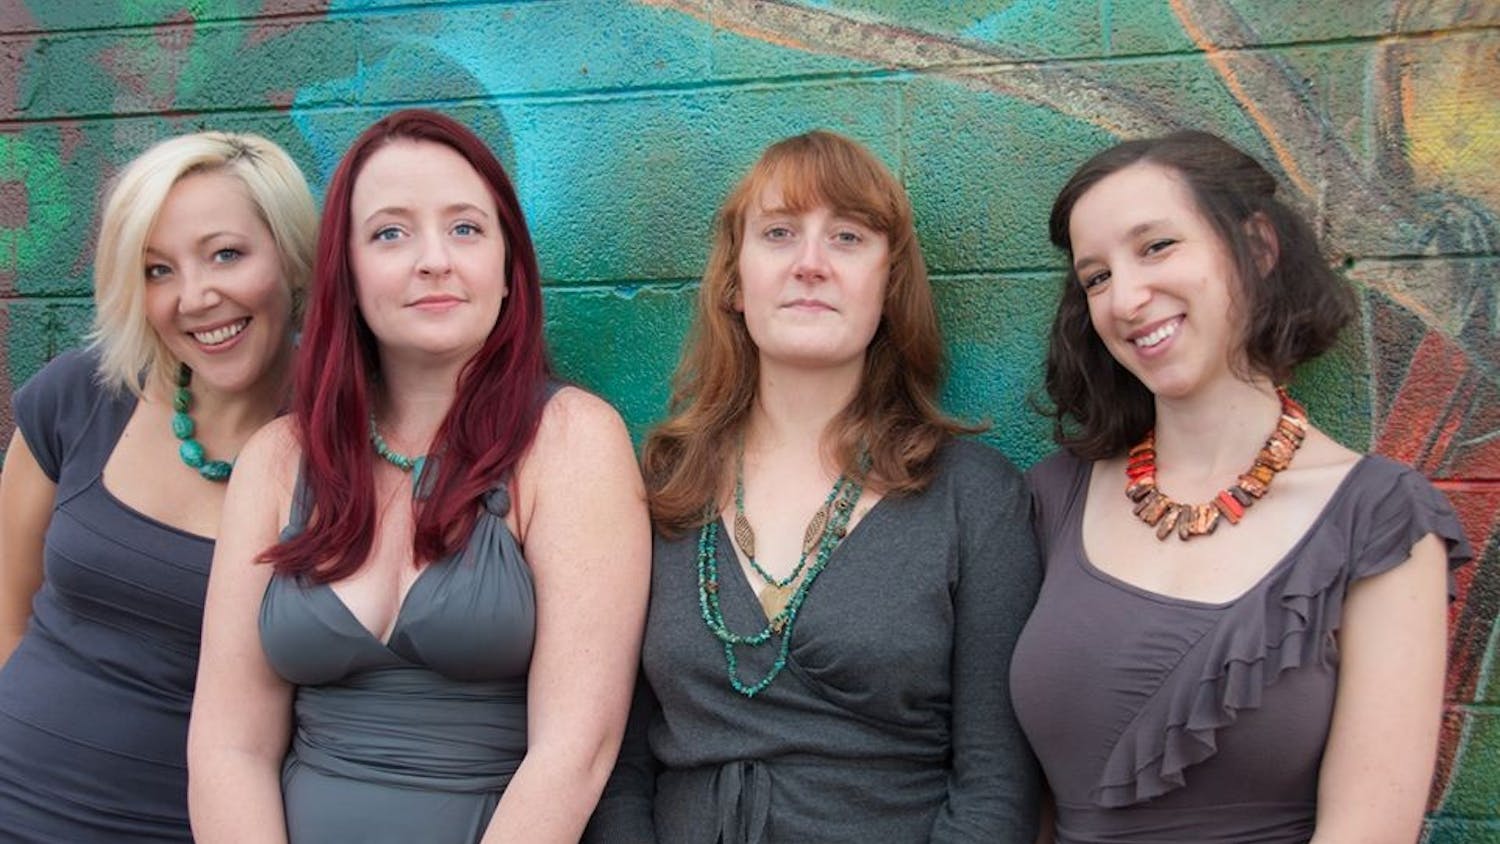 (From left) Dulci Ellenberger, Amber Sims, Amanda Platt and Melissa Hyman make up the members of Sweet Claudette, one of the bands on the bill for Cat's Cradle's Fourth of July show.